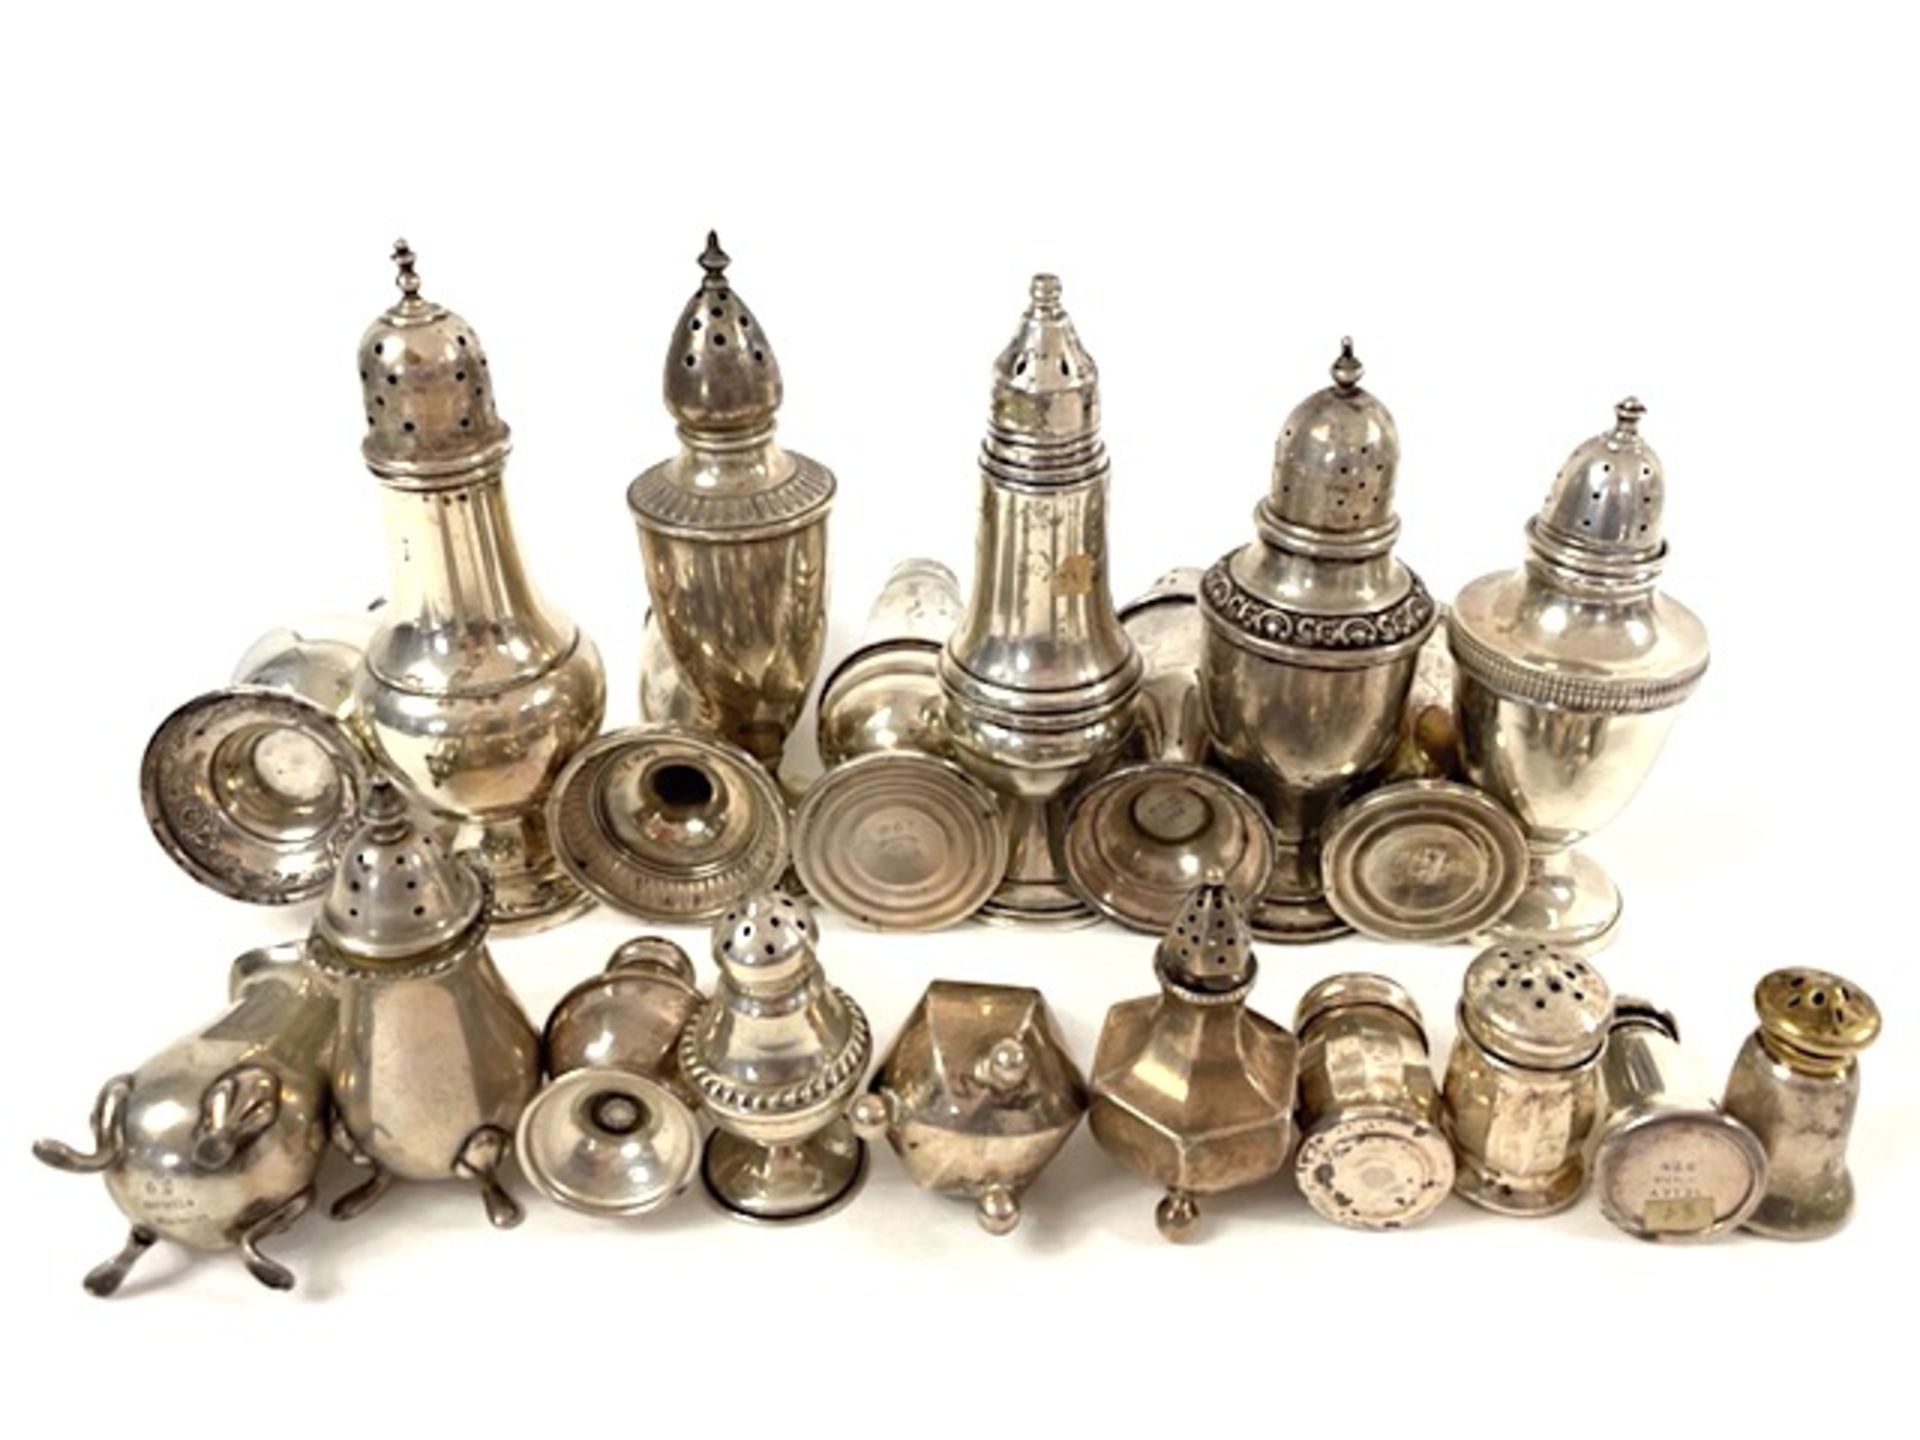 40 pairs of salt/pepper and spice shakers, - Image 87 of 88